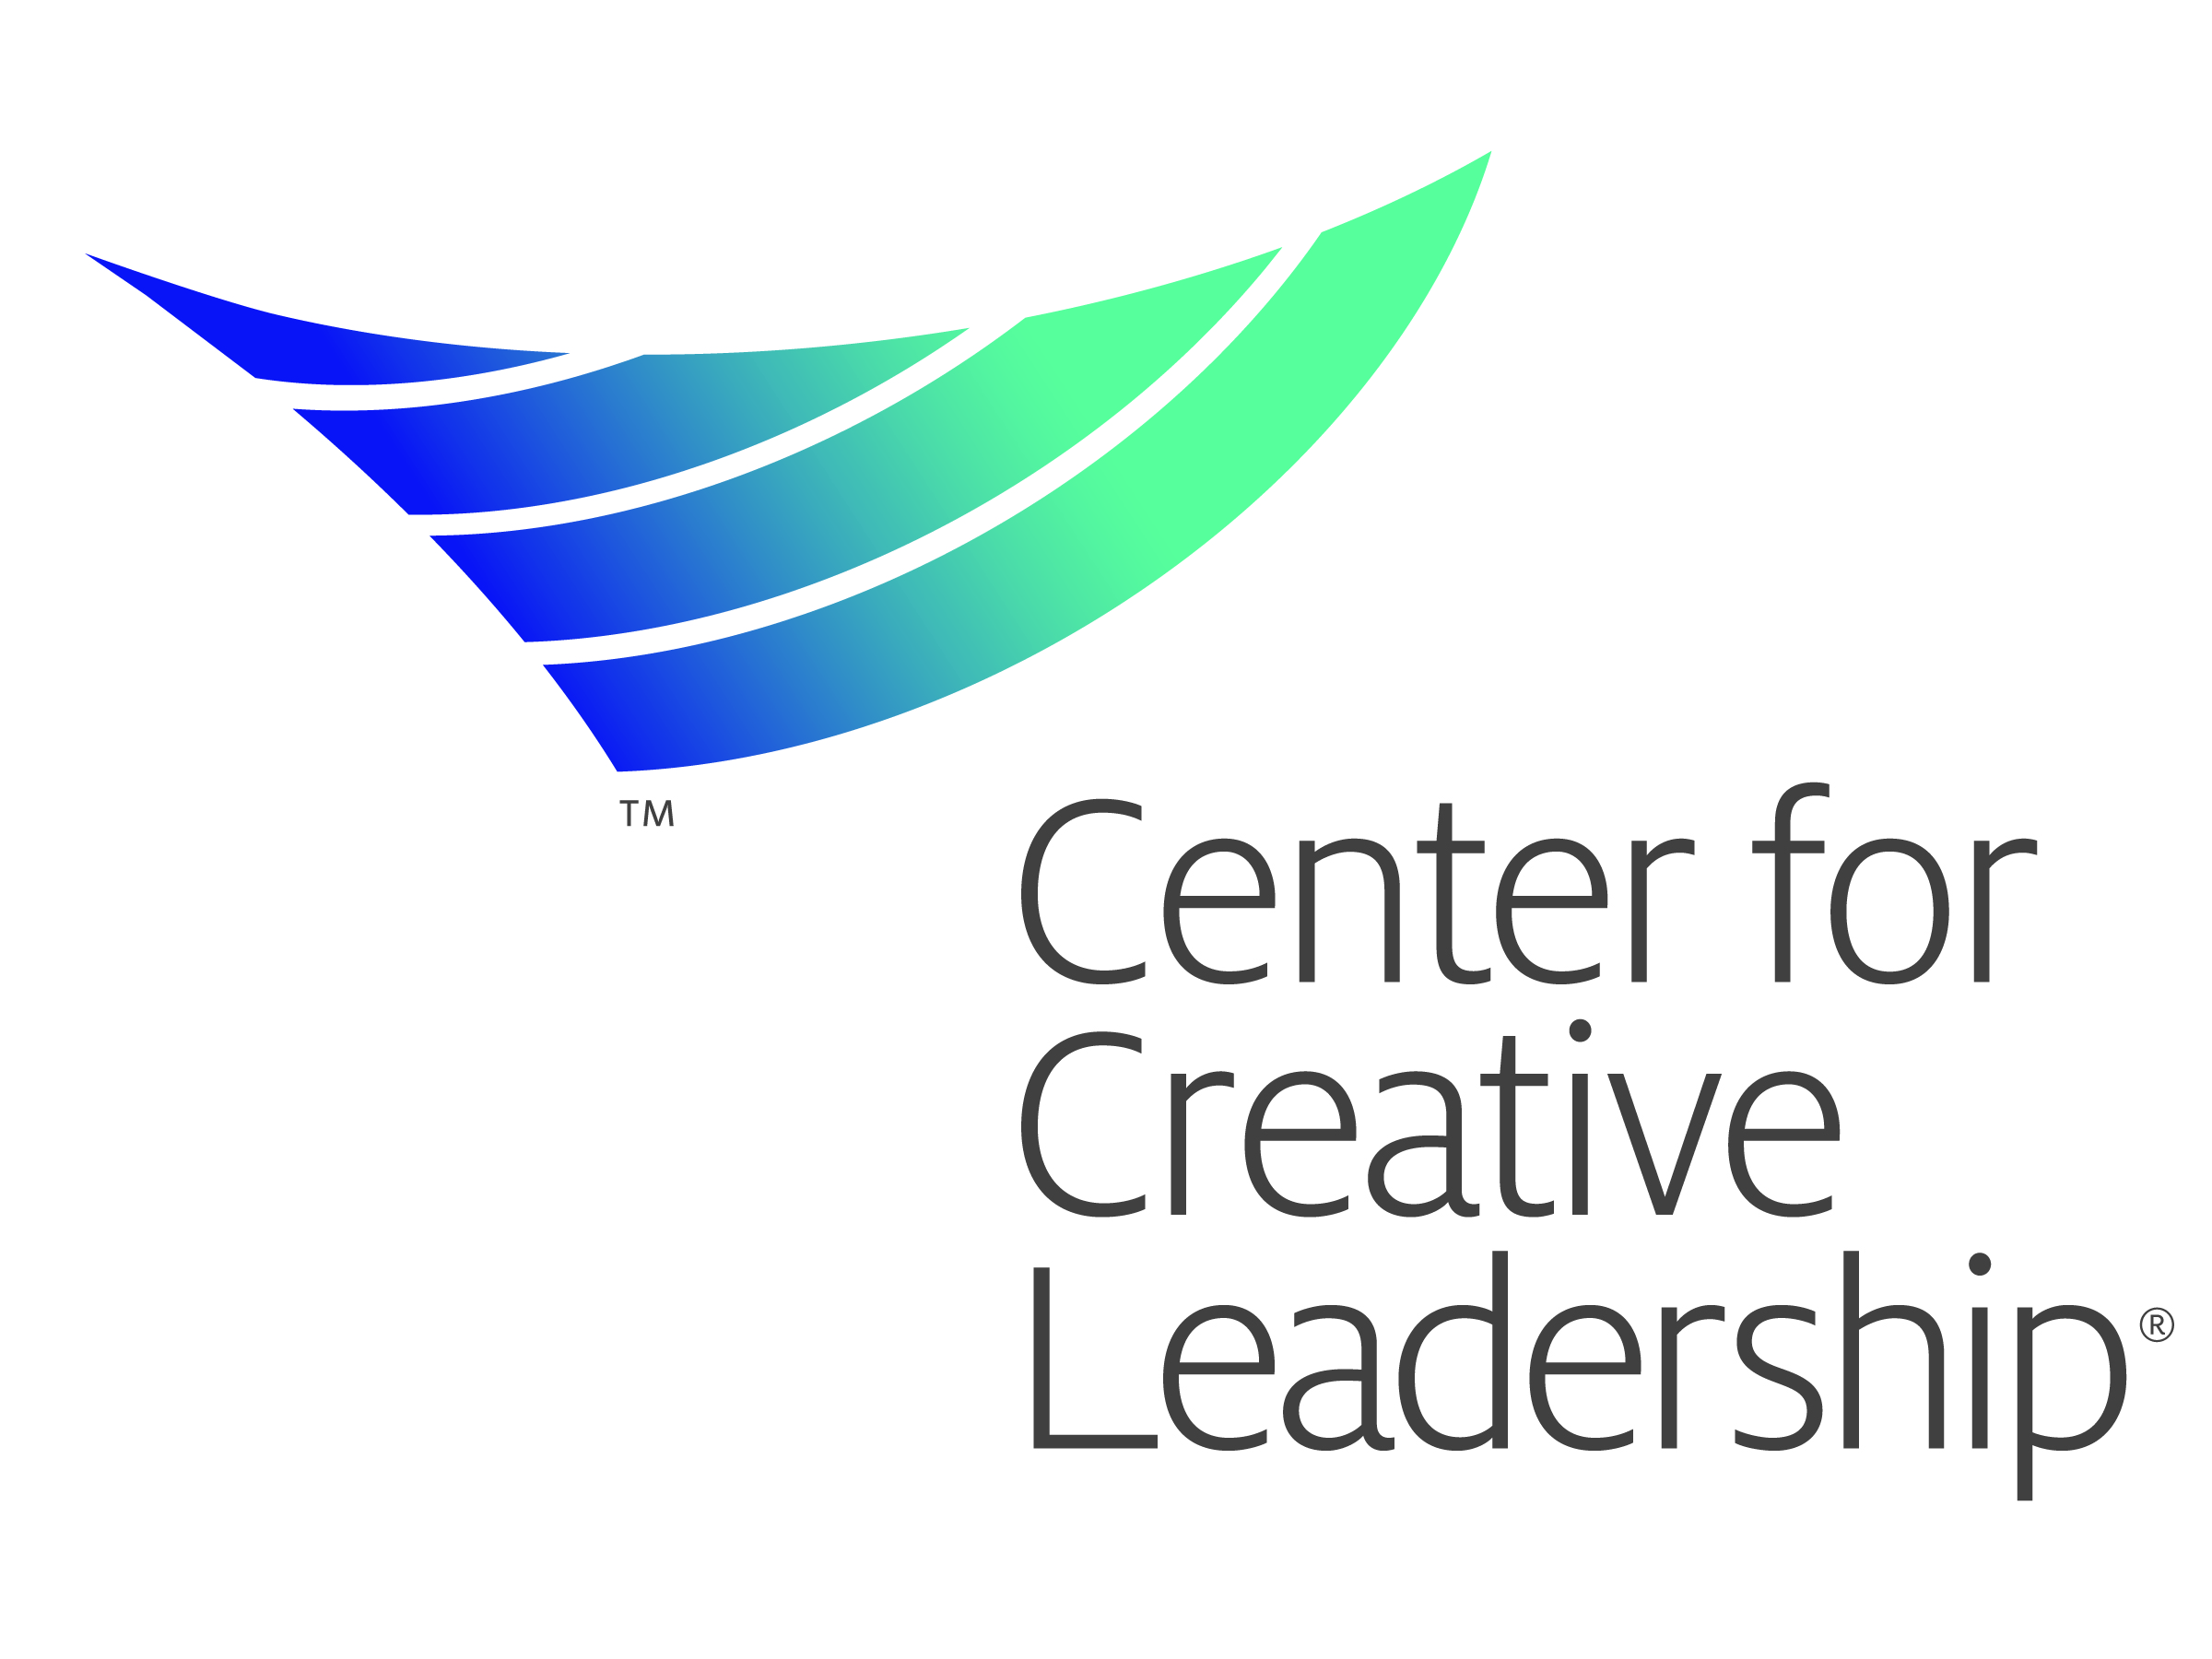 Blue and Green triangle with the text "Center for Creative Leadership"